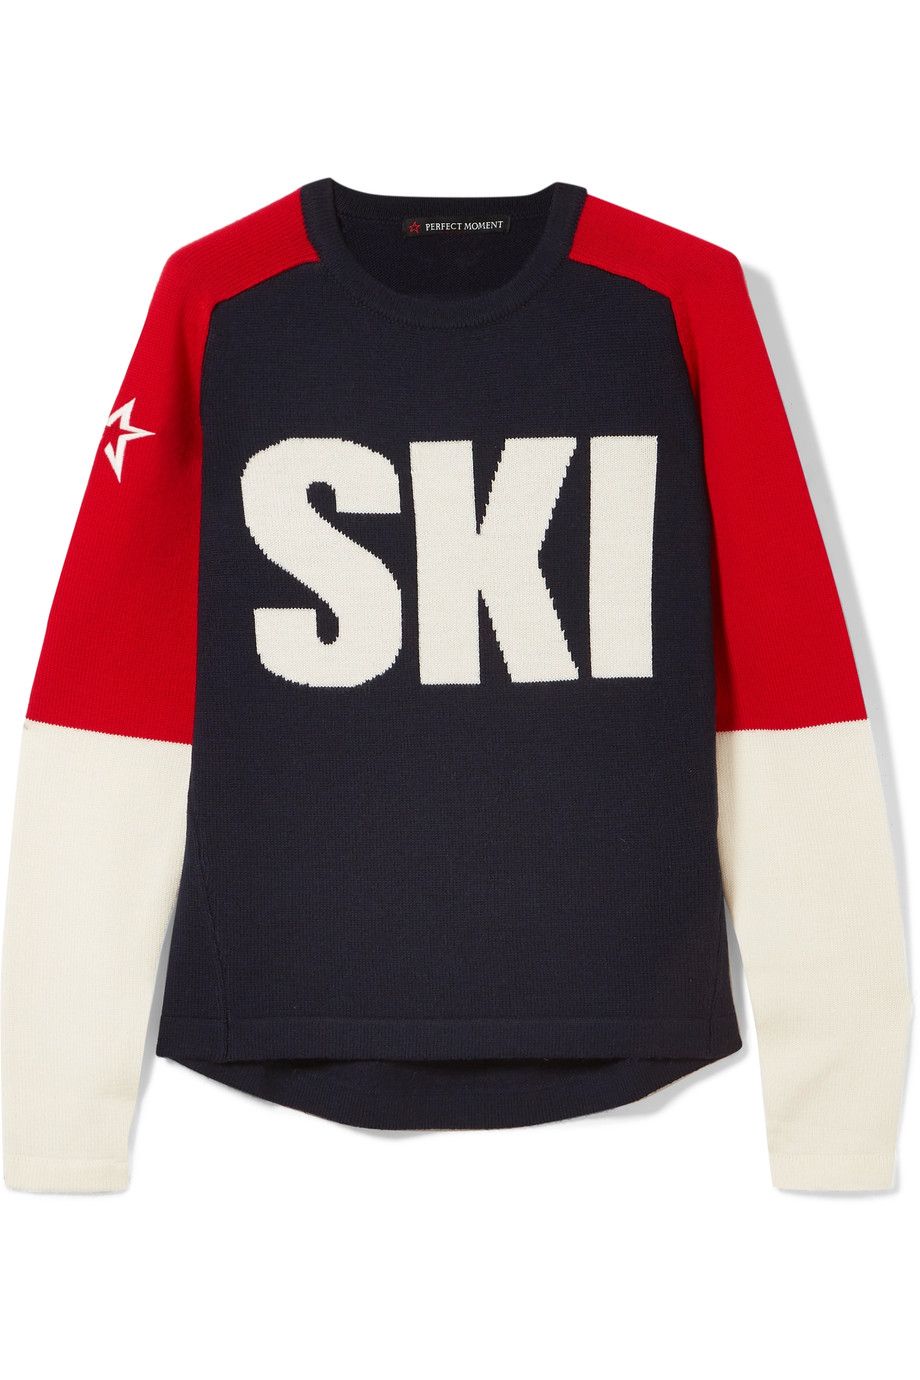 Clothing, Long-sleeved t-shirt, Sleeve, White, T-shirt, Red, Jersey, Outerwear, Sweater, Font, 